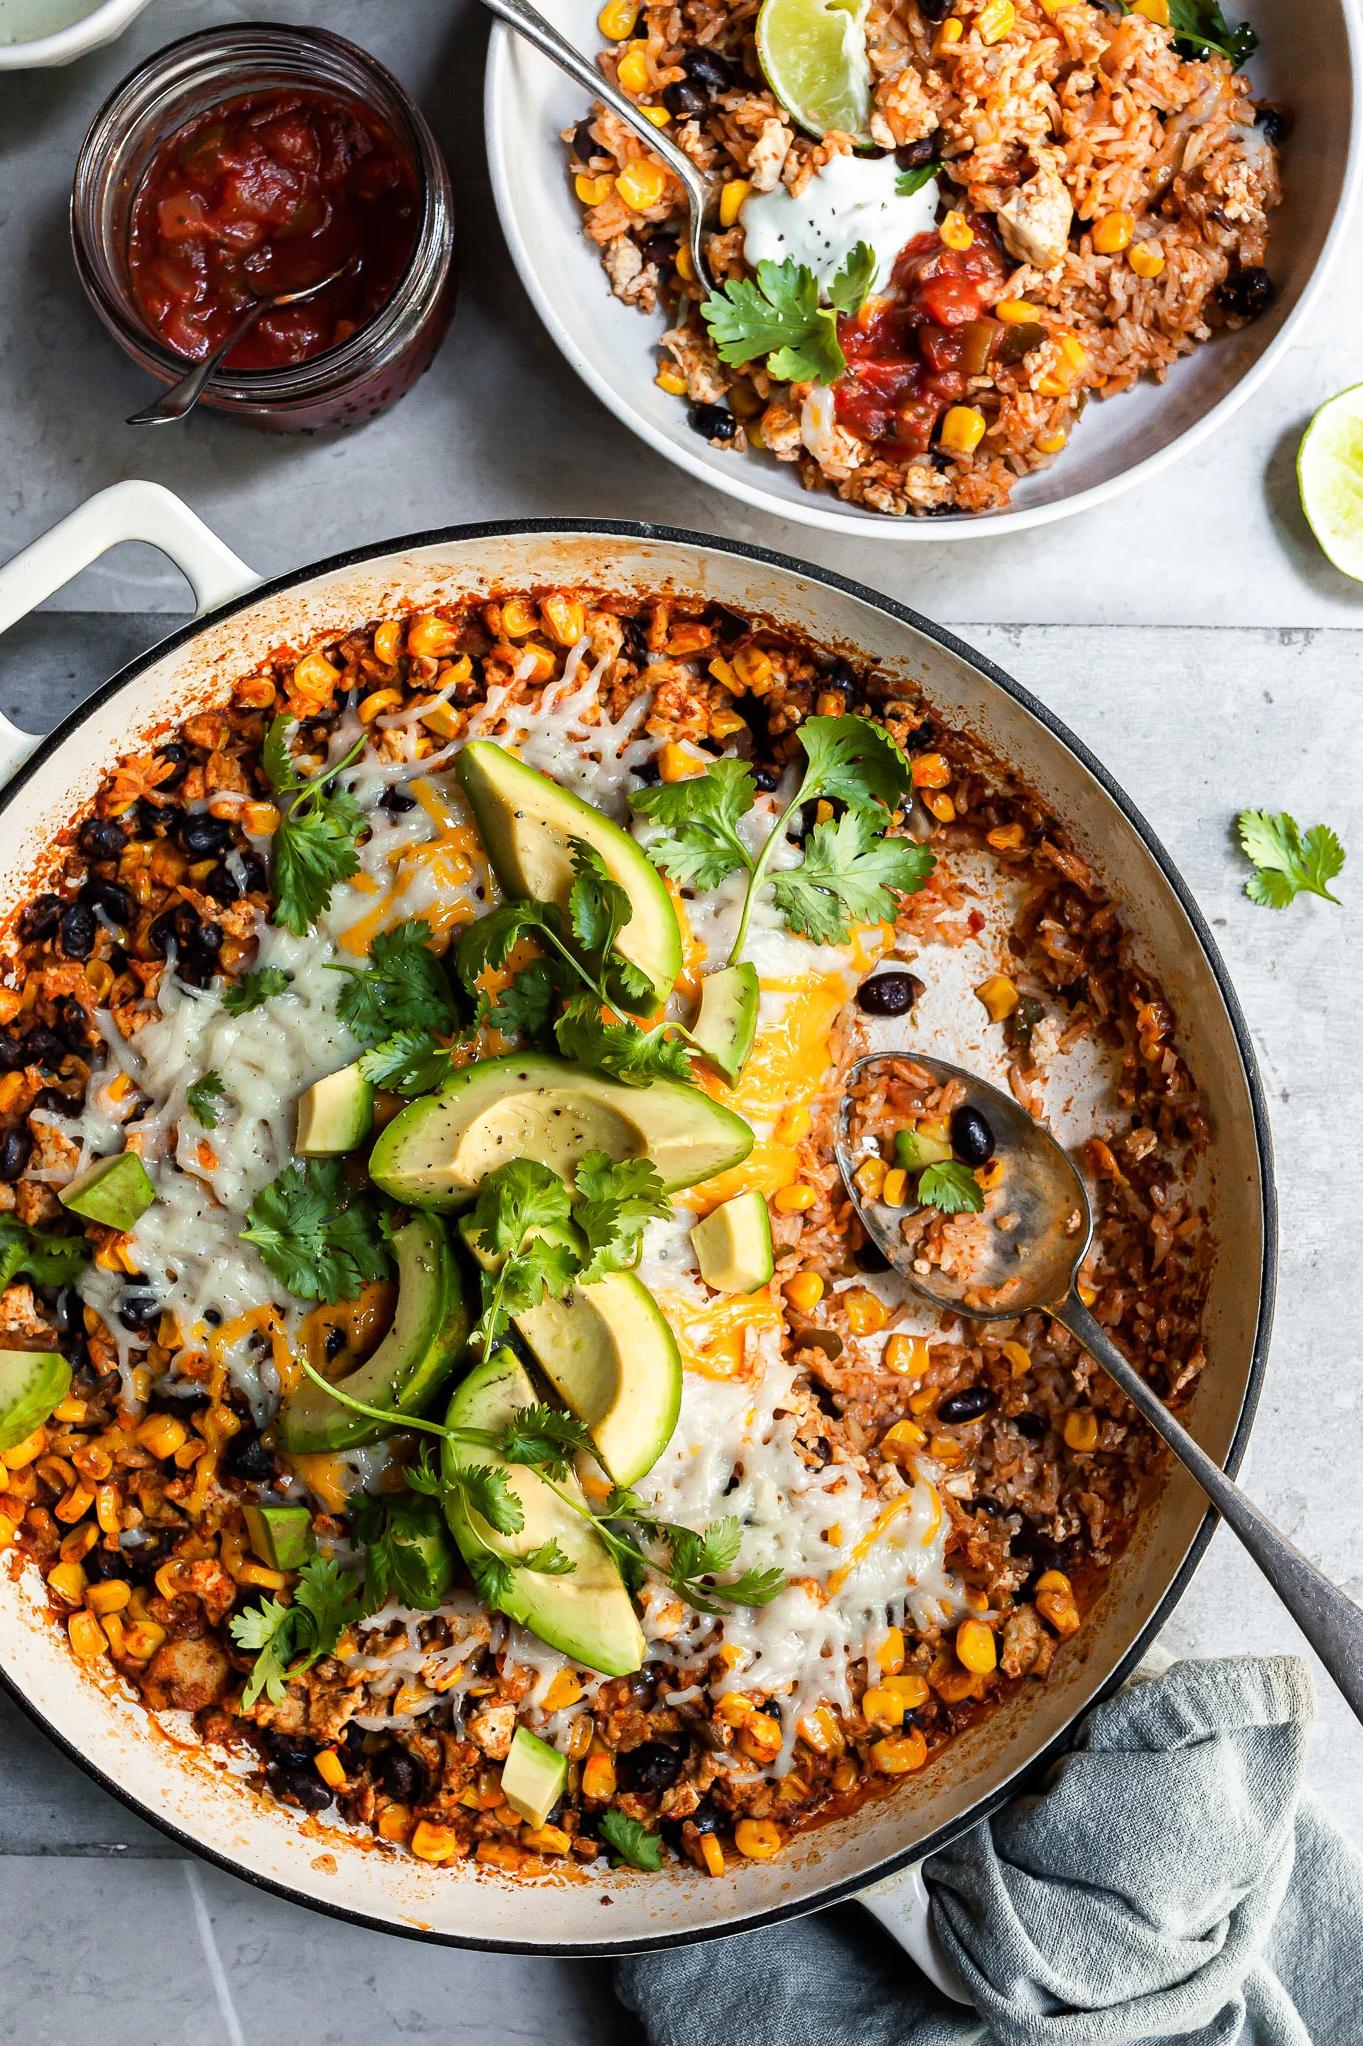  This baked Mexican rice screams comfort food.